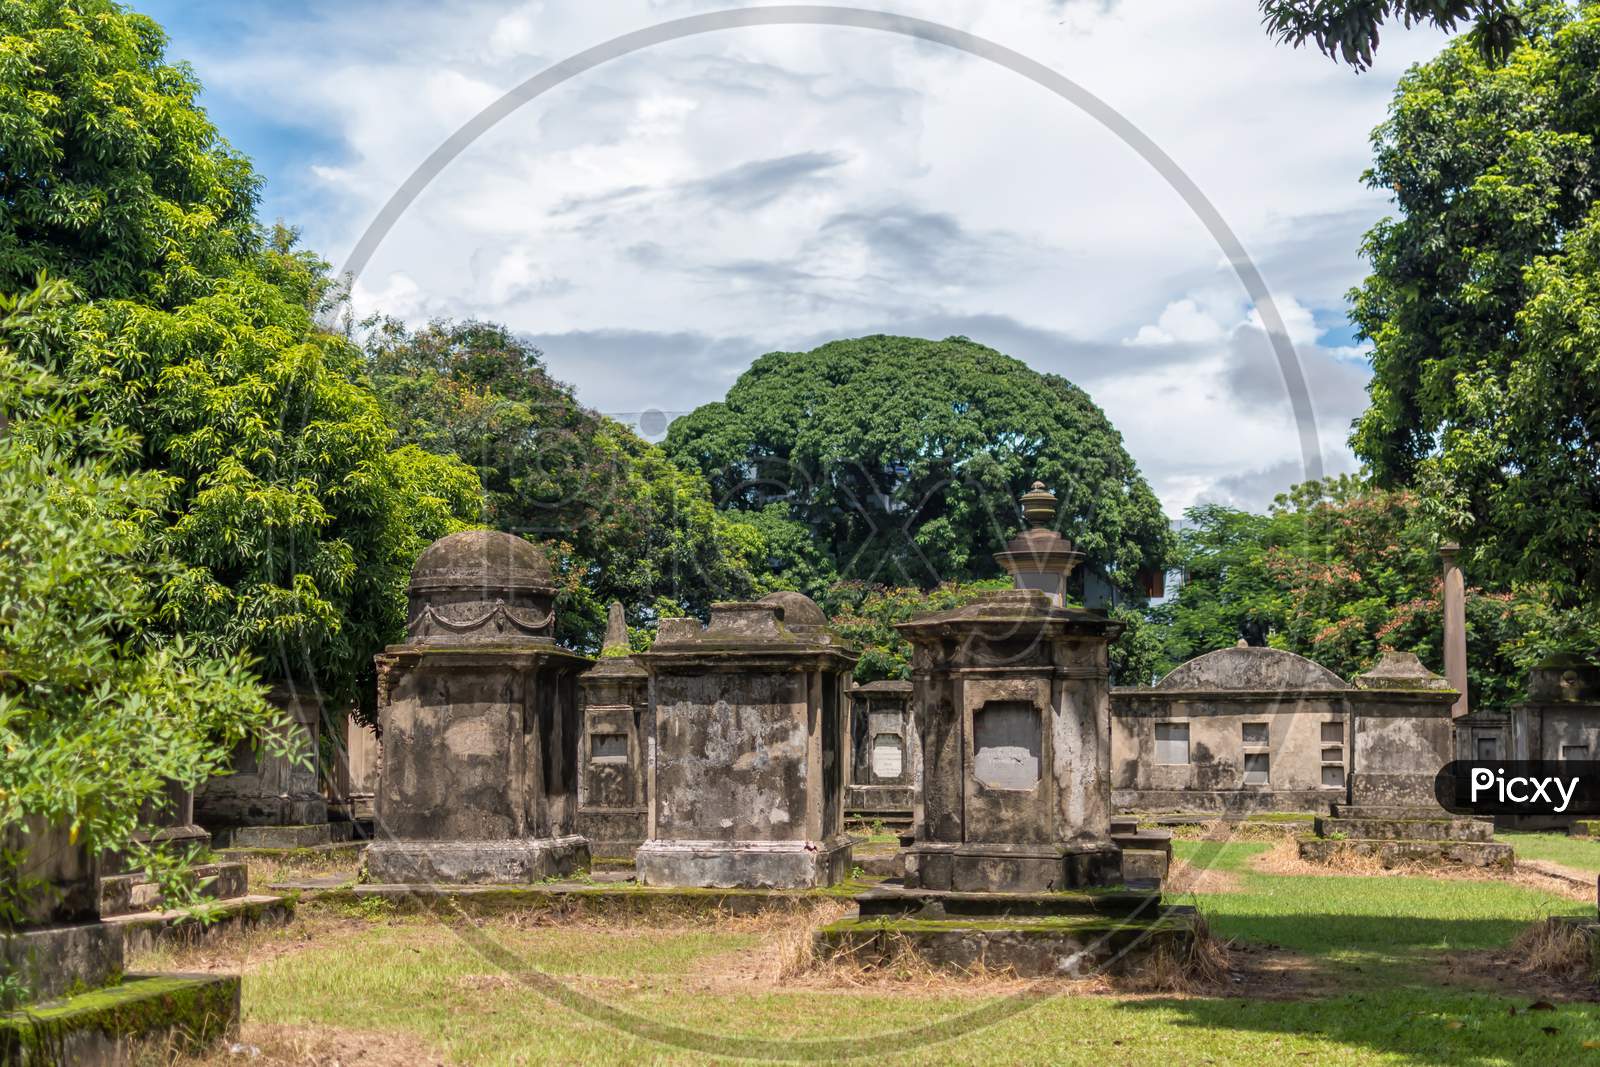 Old Trees And Ancient Gravestones Tombs Of South Park Street Cemetery In Kolkata, India. The Largest Christian Cemetery In Asia